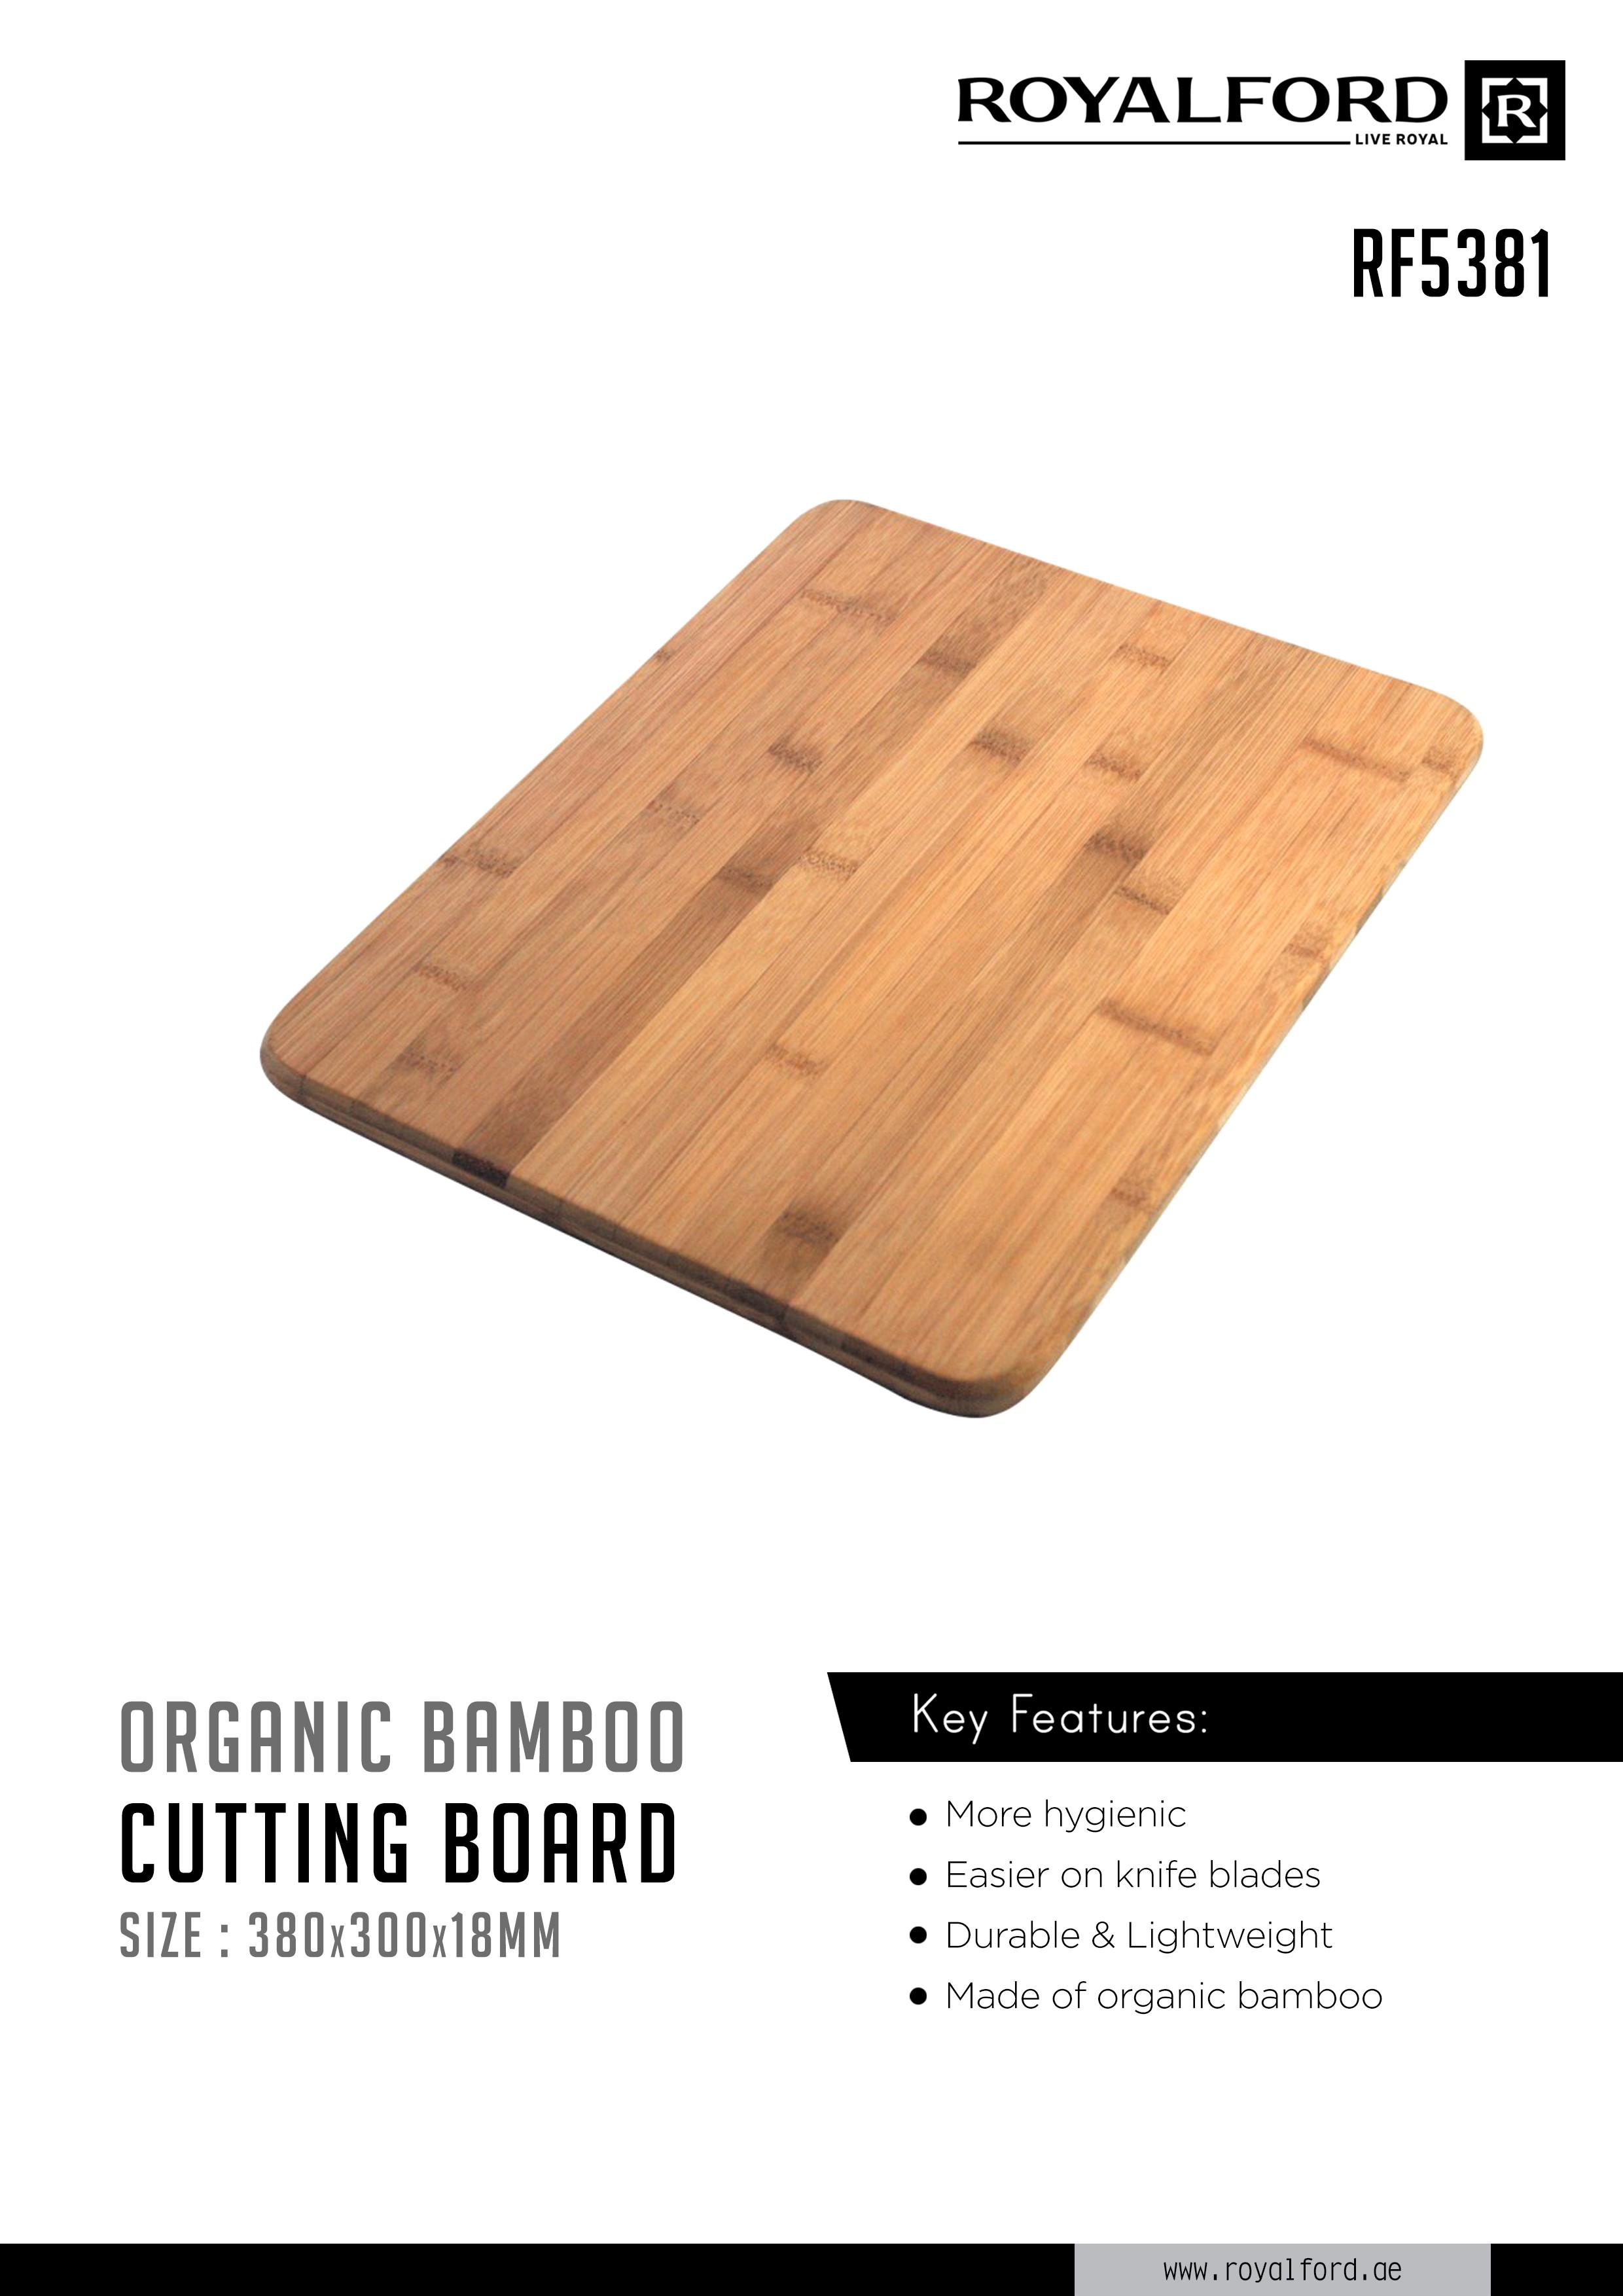 Bamboo Cutting Board for Kitchen, Wood Chopping Board, Easy Grip Handle, BPA  Free, 100% Natural (Extra Large) 